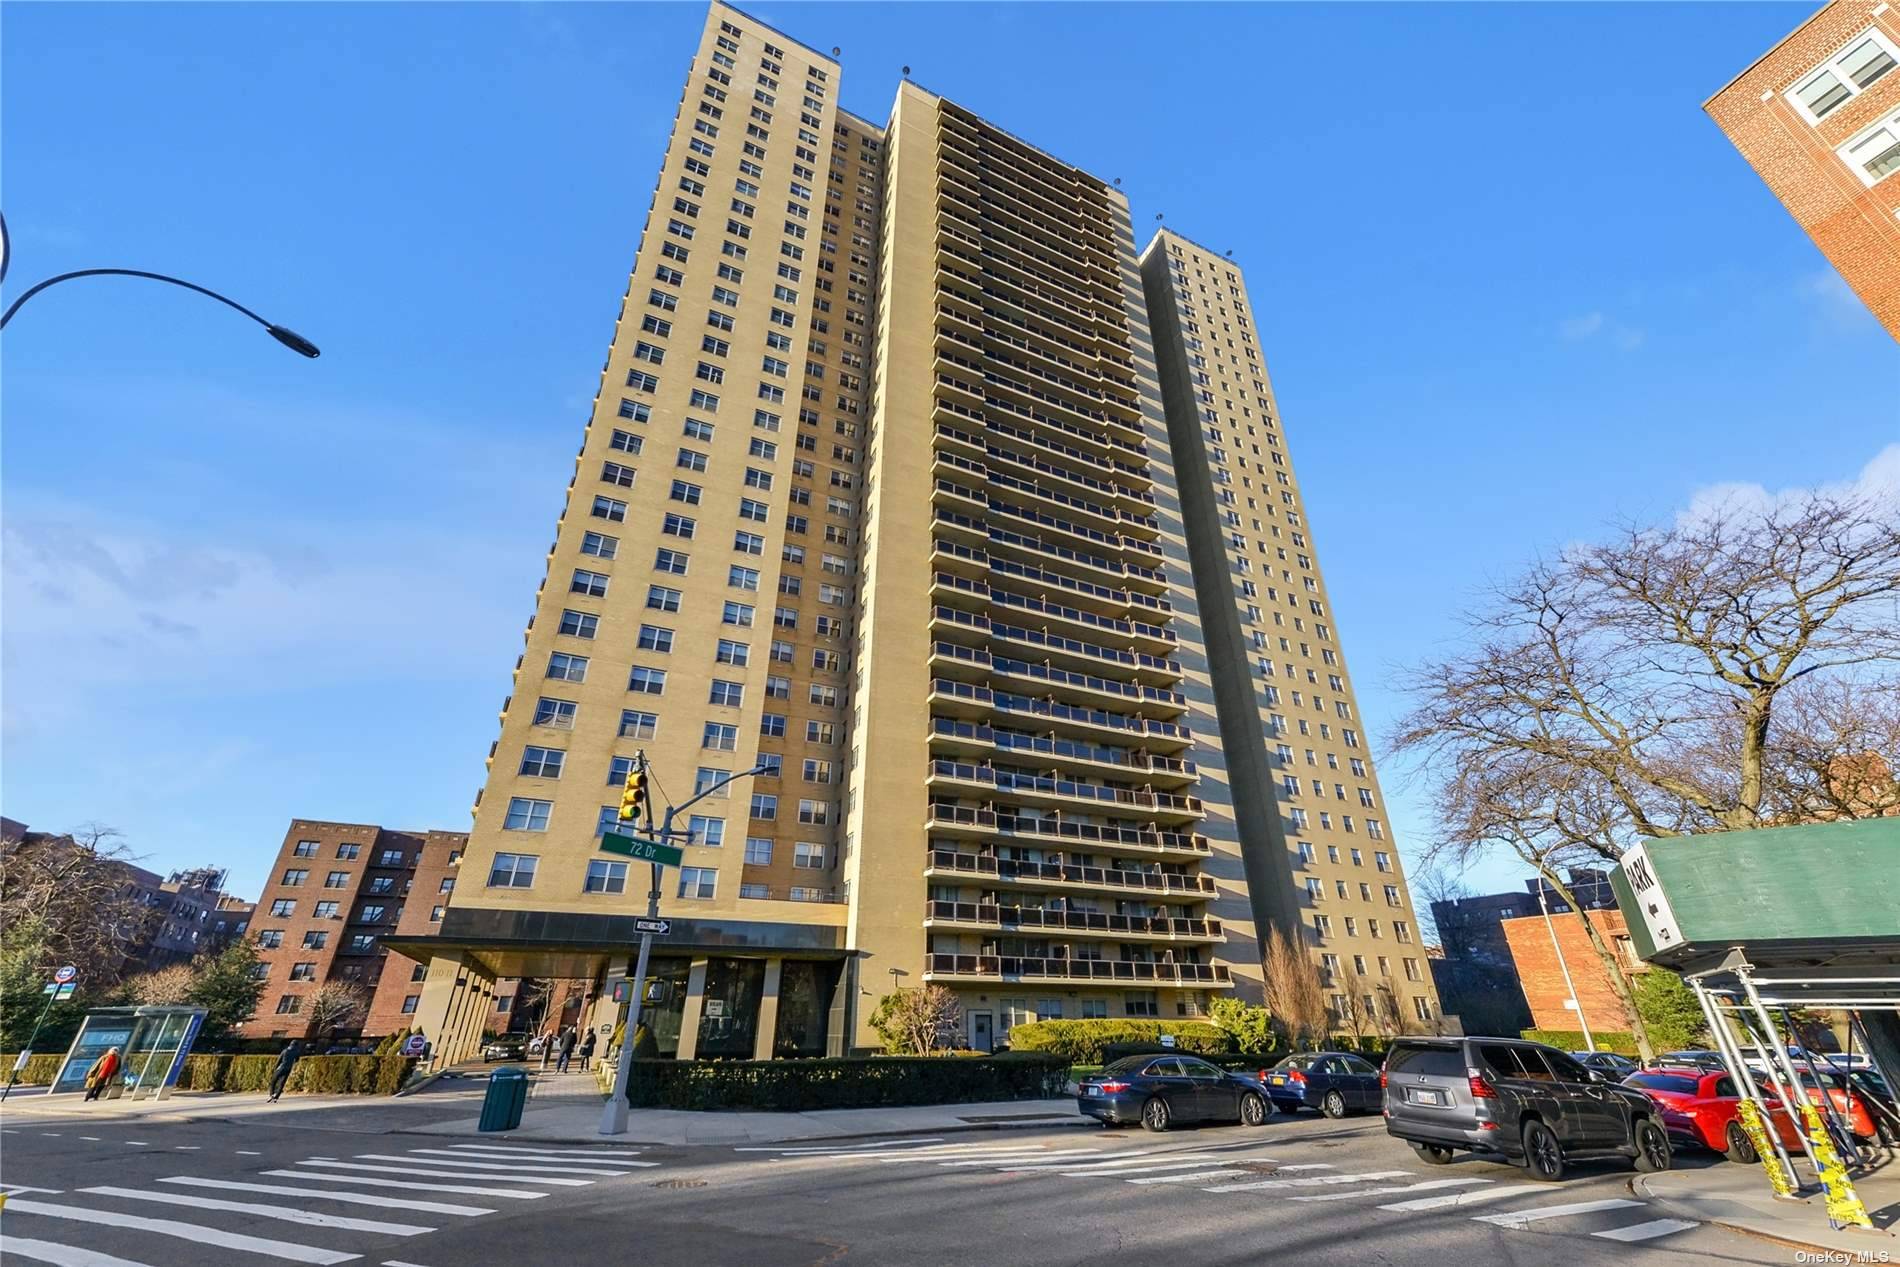 Experience the prestige of Kennedy House, a distinguished luxury landmark in Queens !